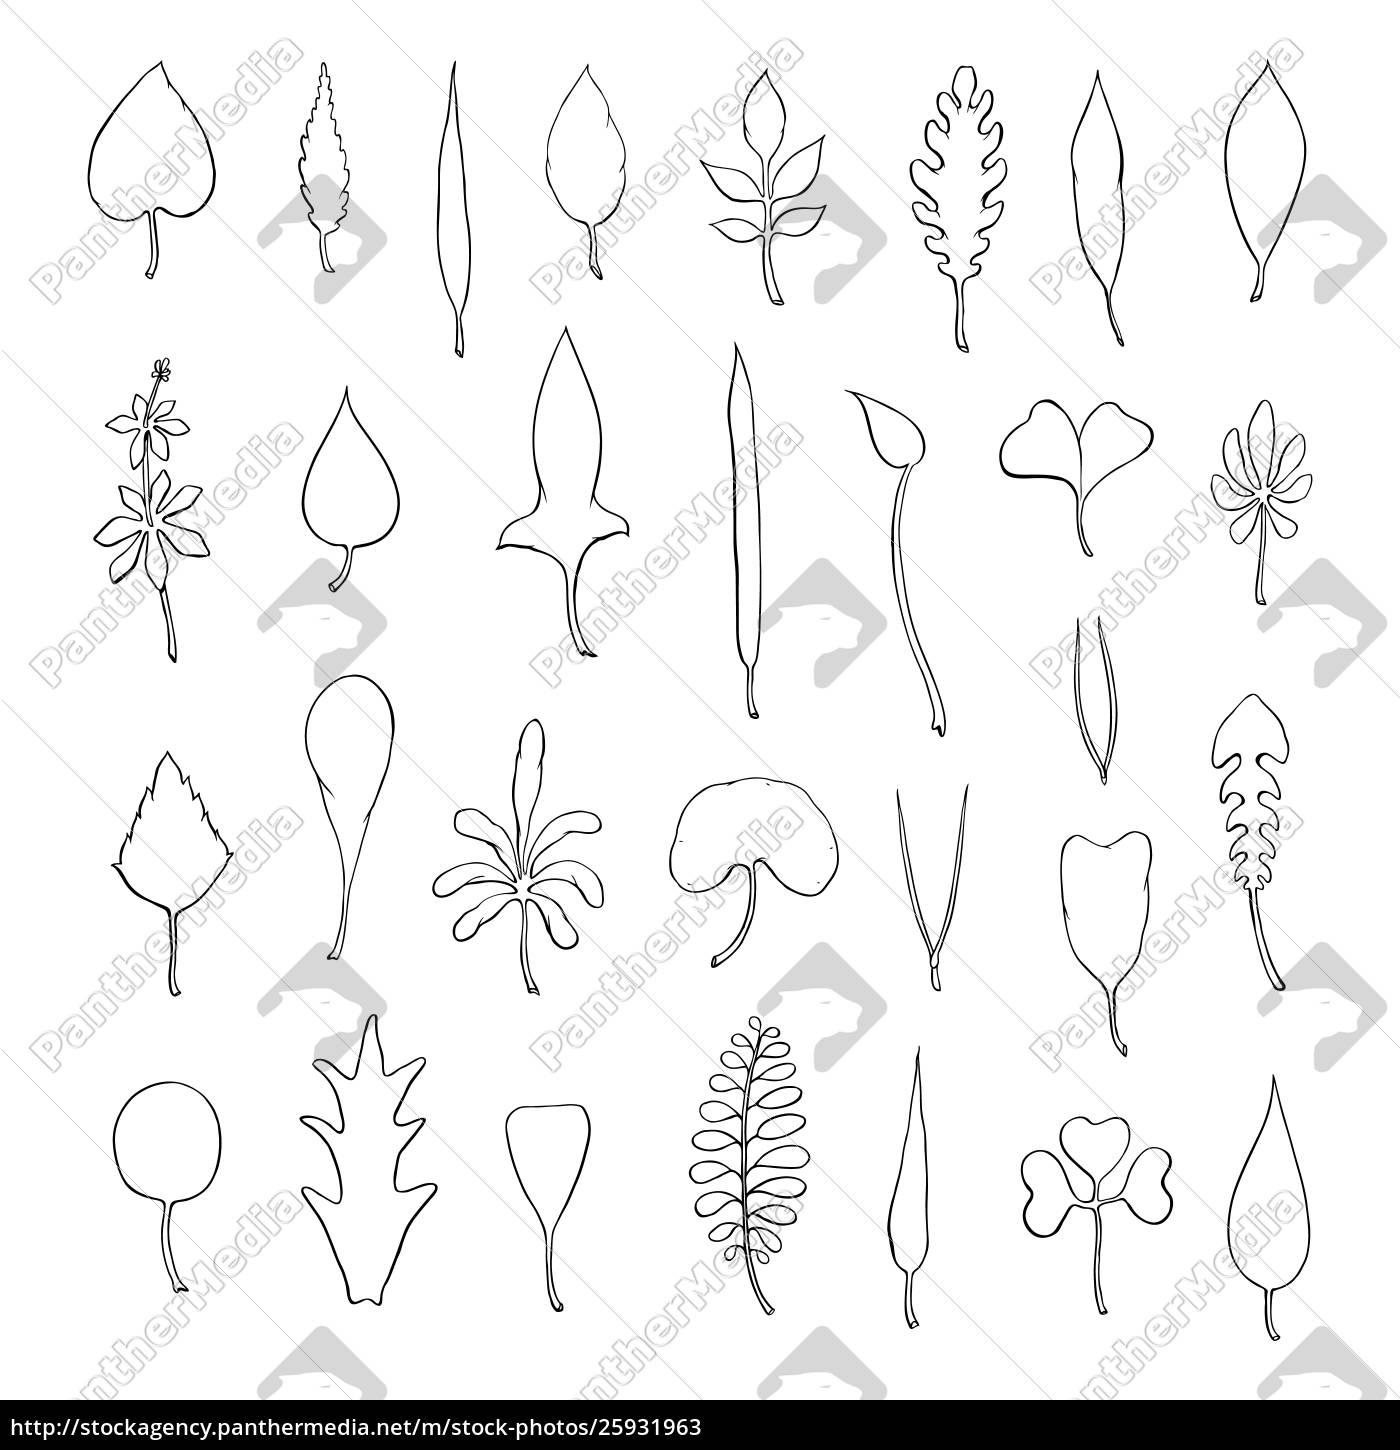 types-of-leaf-outline-leaves-of-different-types-stock-photo